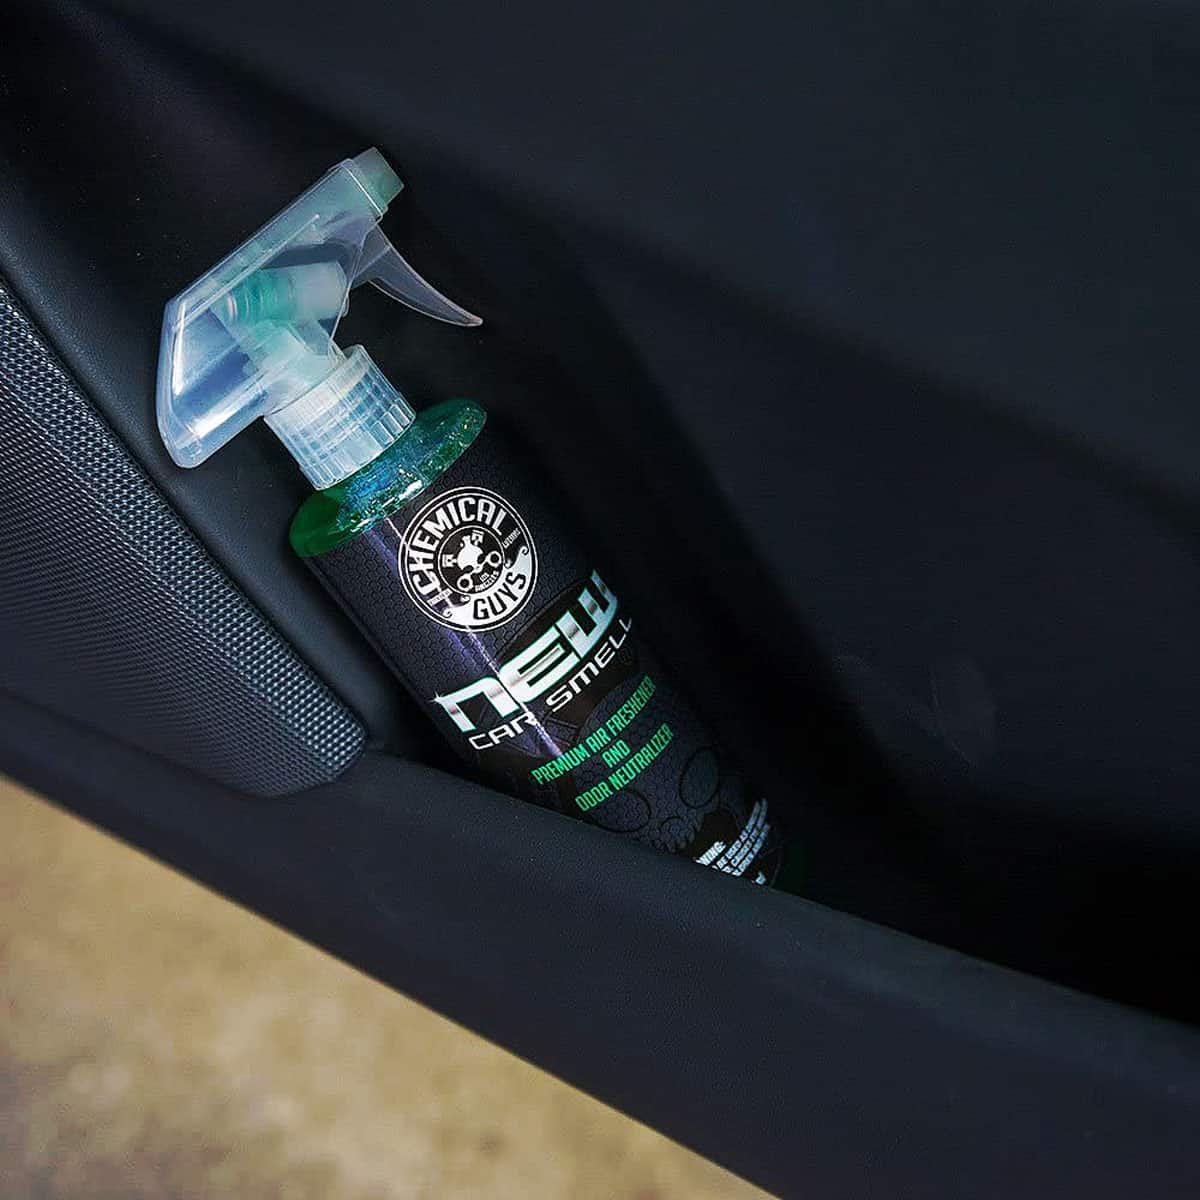 Chemical Guys New Car Smell Premium Air Freshener: Their best-selling car scent - door side